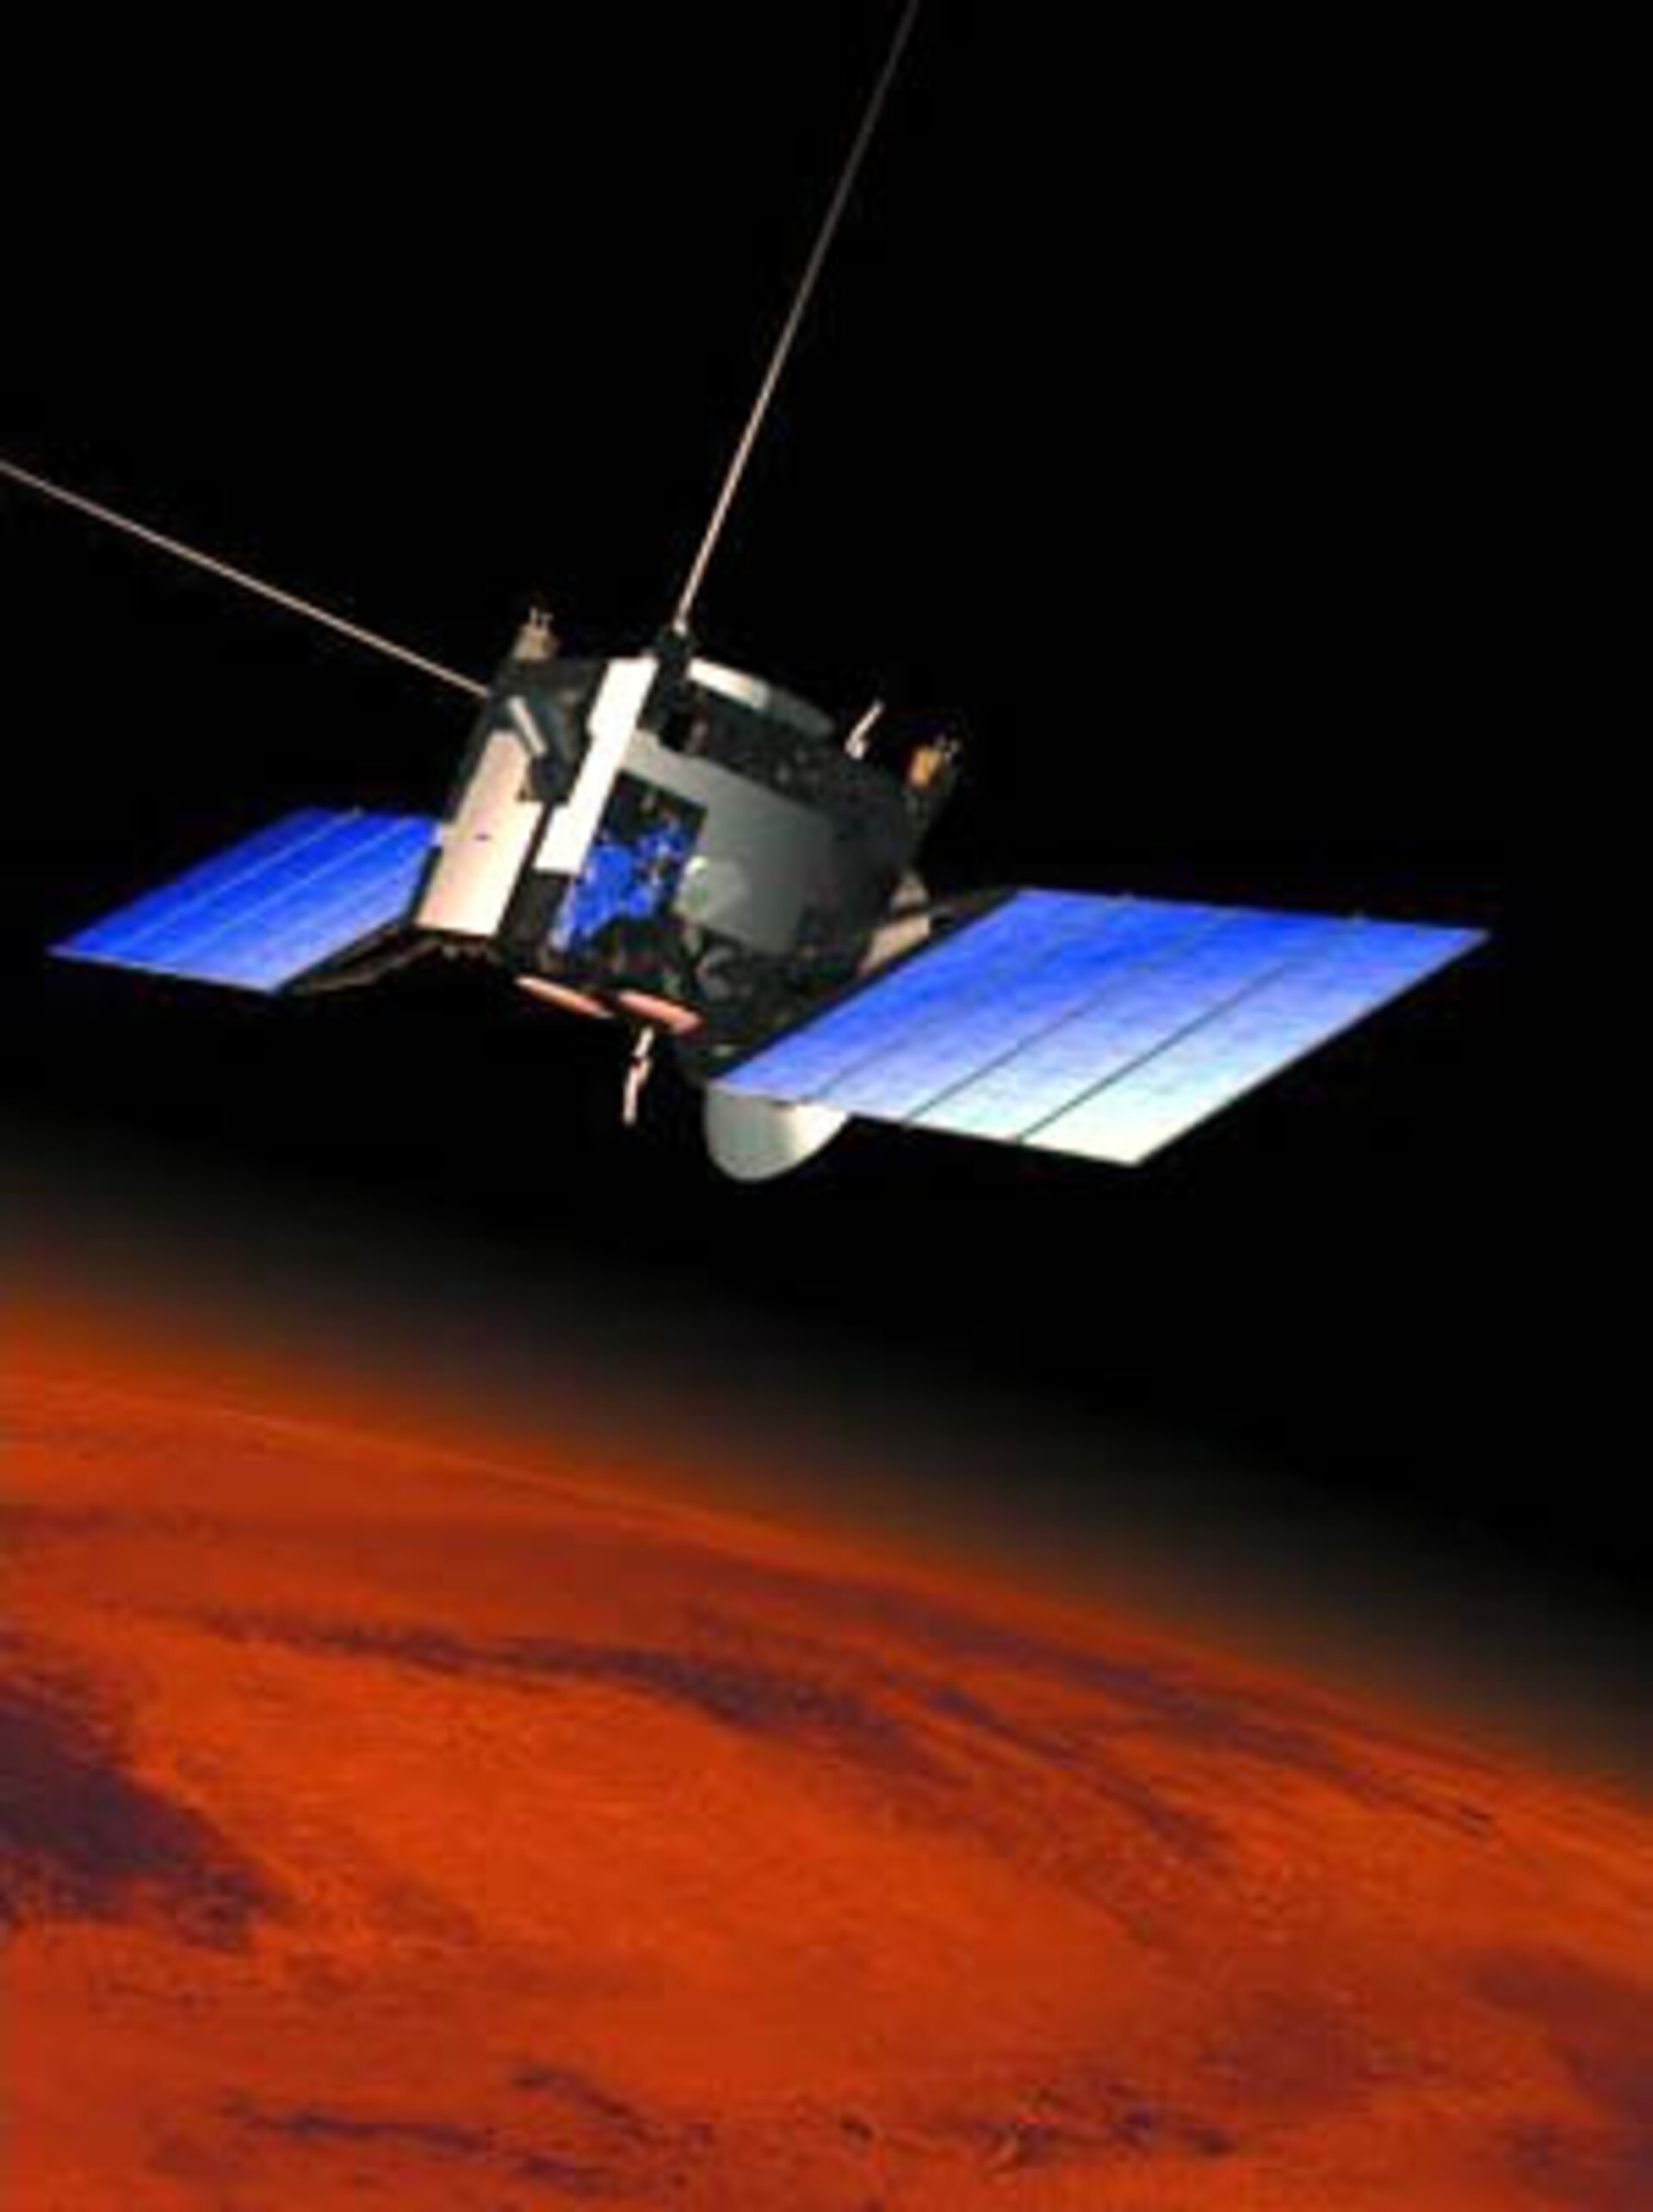 Mars Express will be launched on 2 June 2003